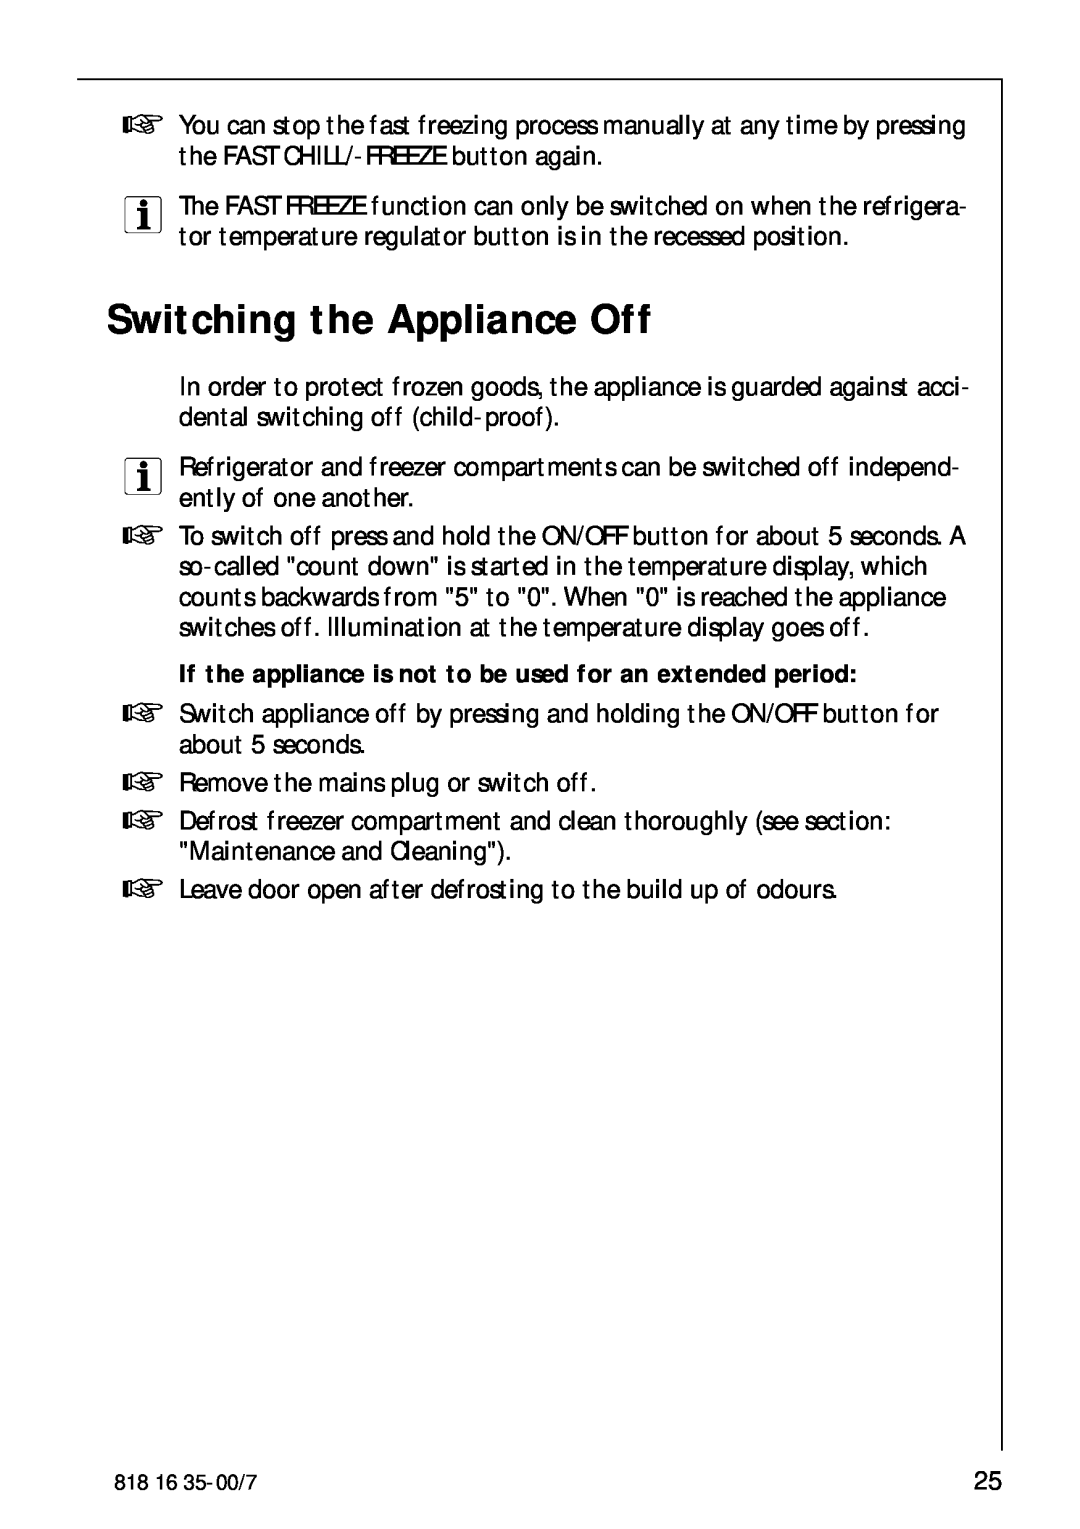 Electrolux KO_SANTO 4085 Switching the Appliance Off, If the appliance is not to be used for an extended period 